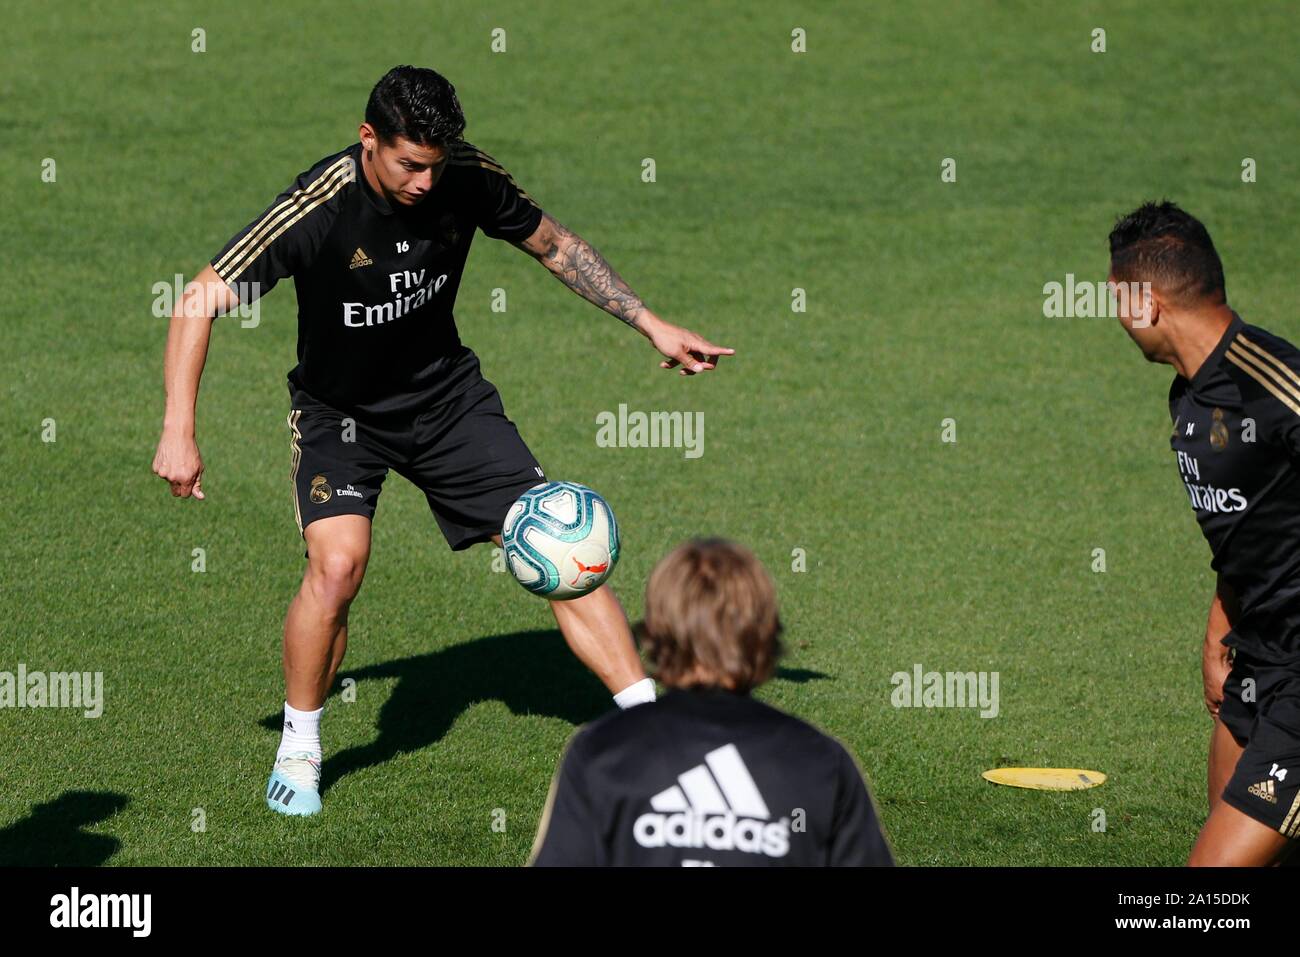 Madrid, Spain. 24th Sep, 2019. JAMES RODRIGUEZ DURING TRAINING OF REAL MADRID AT MADRID SPORT CITY. TUESDAY, 24 SEPTEMBER 2019. Credit: CORDON PRESS/Alamy Live News Stock Photo